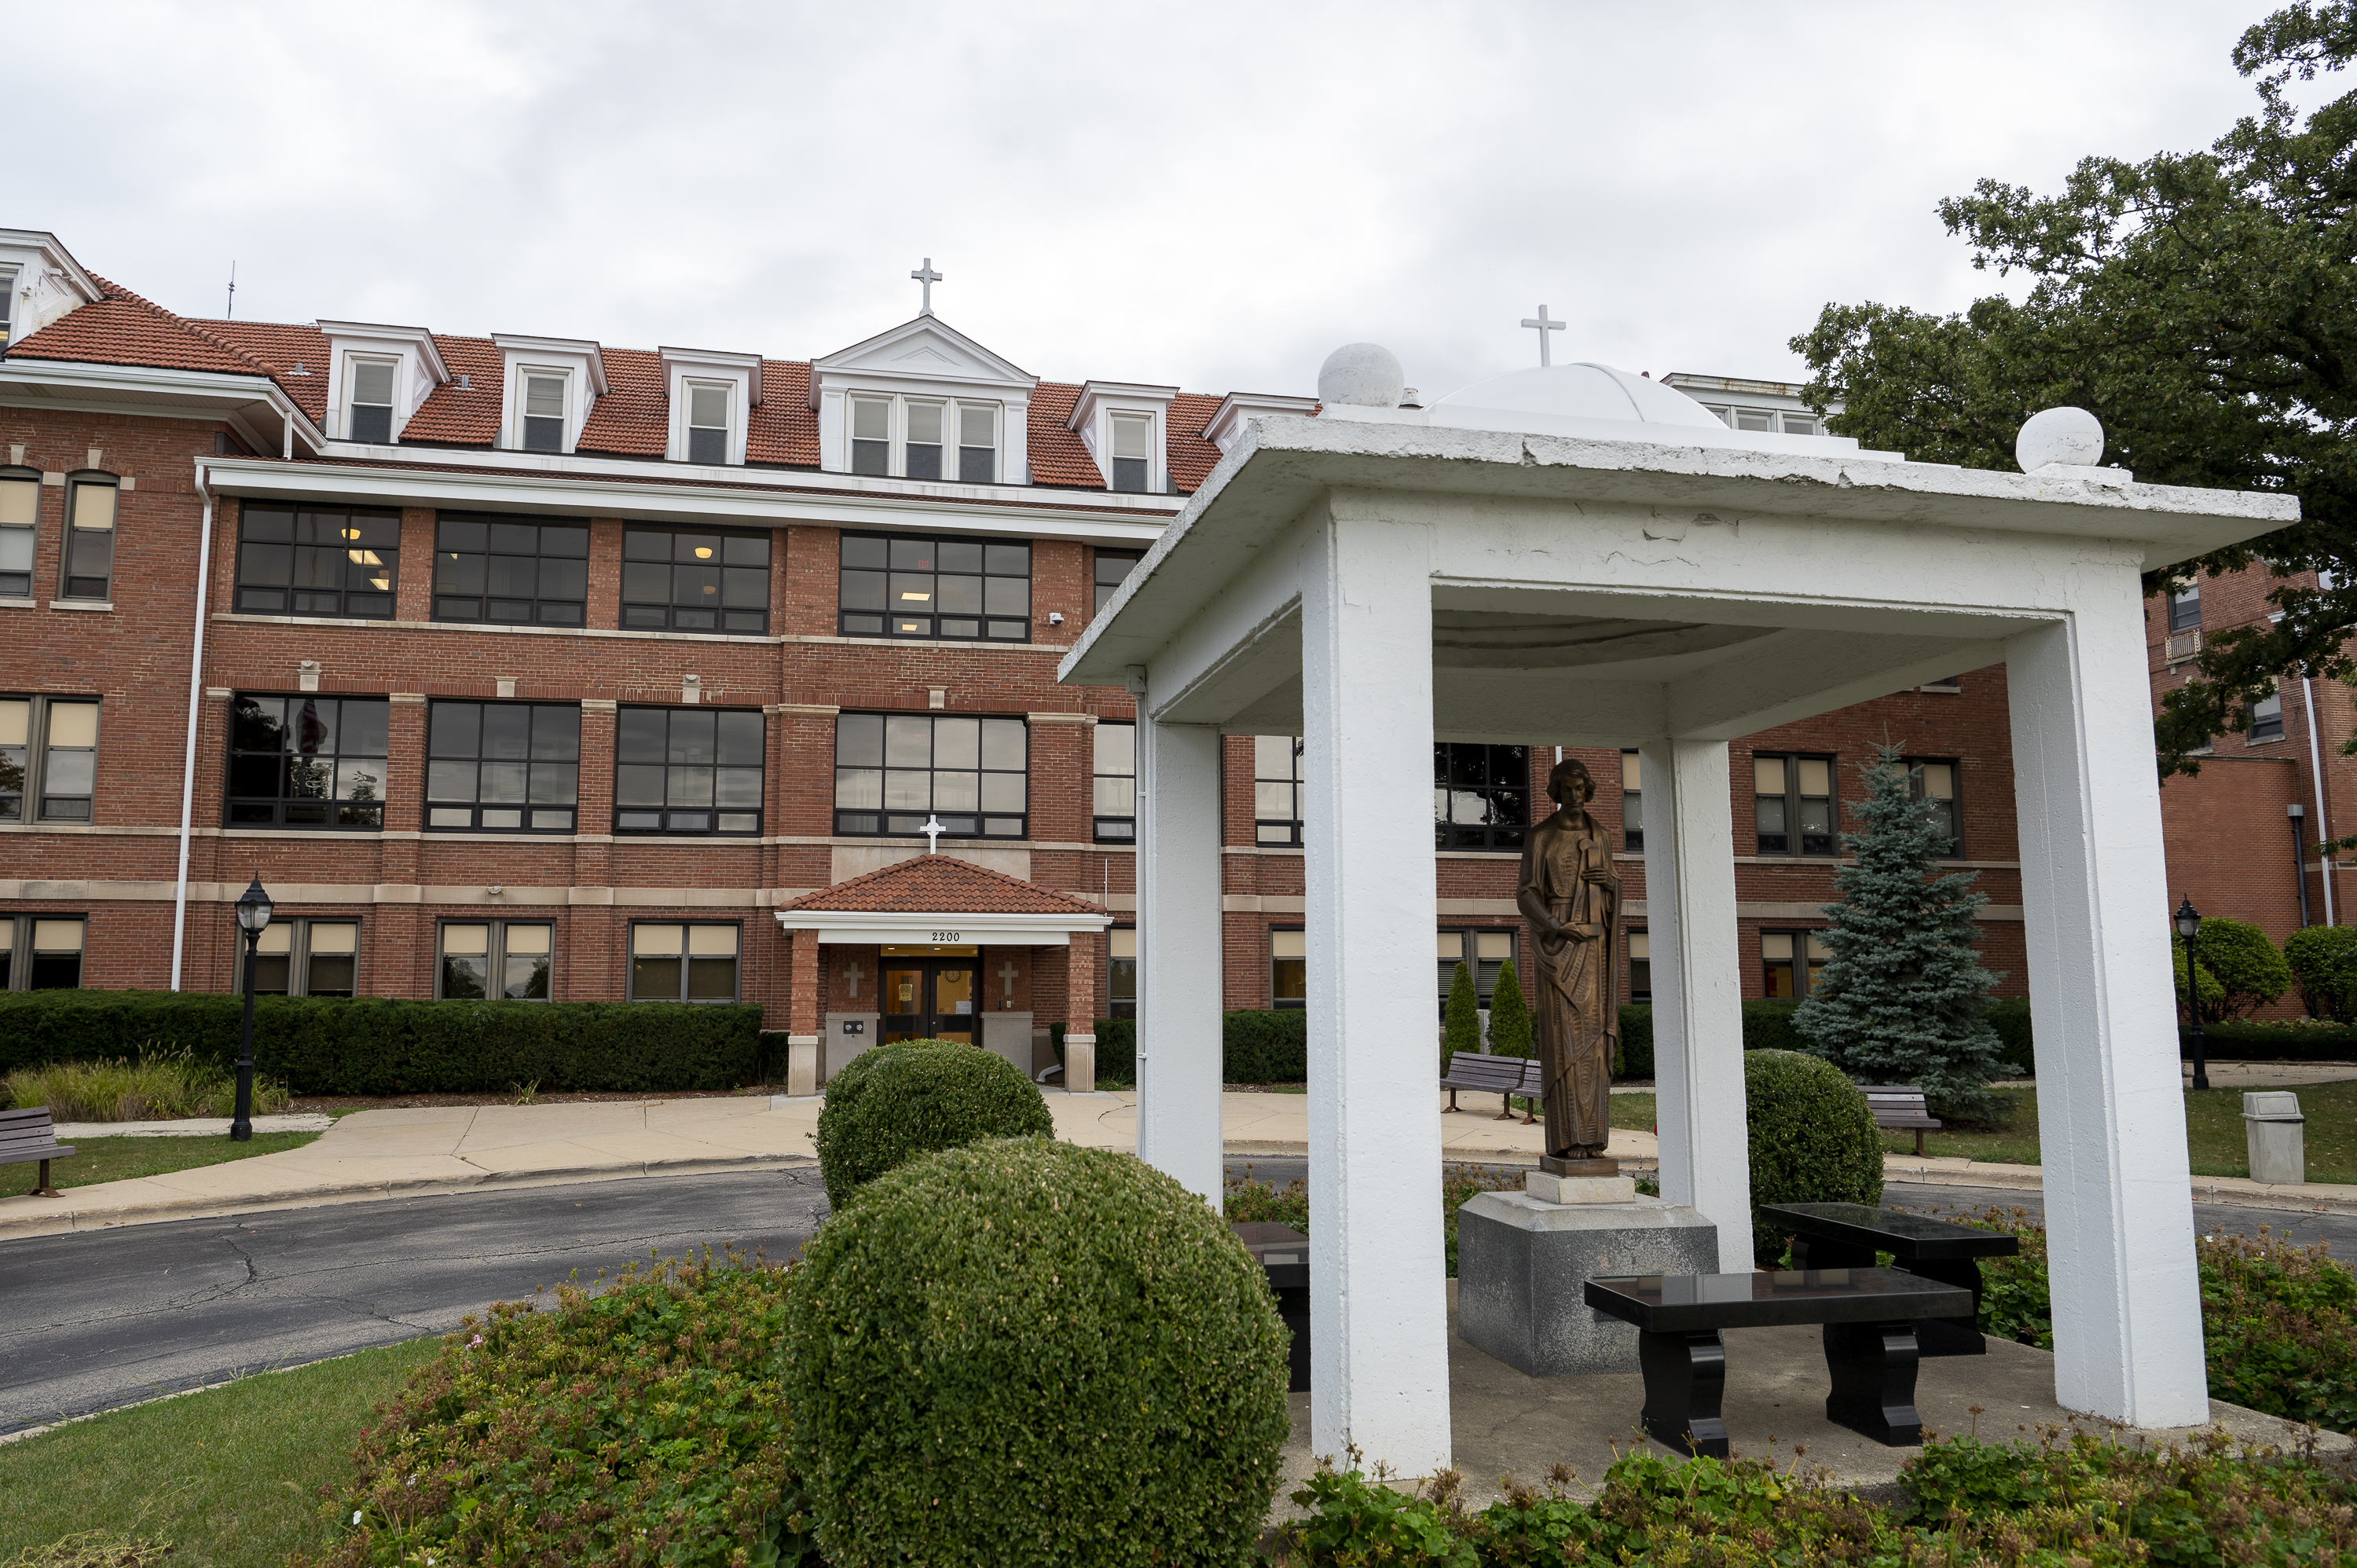 Benet Academy located at 2200 Maple Ave. in Lisle, Ill.